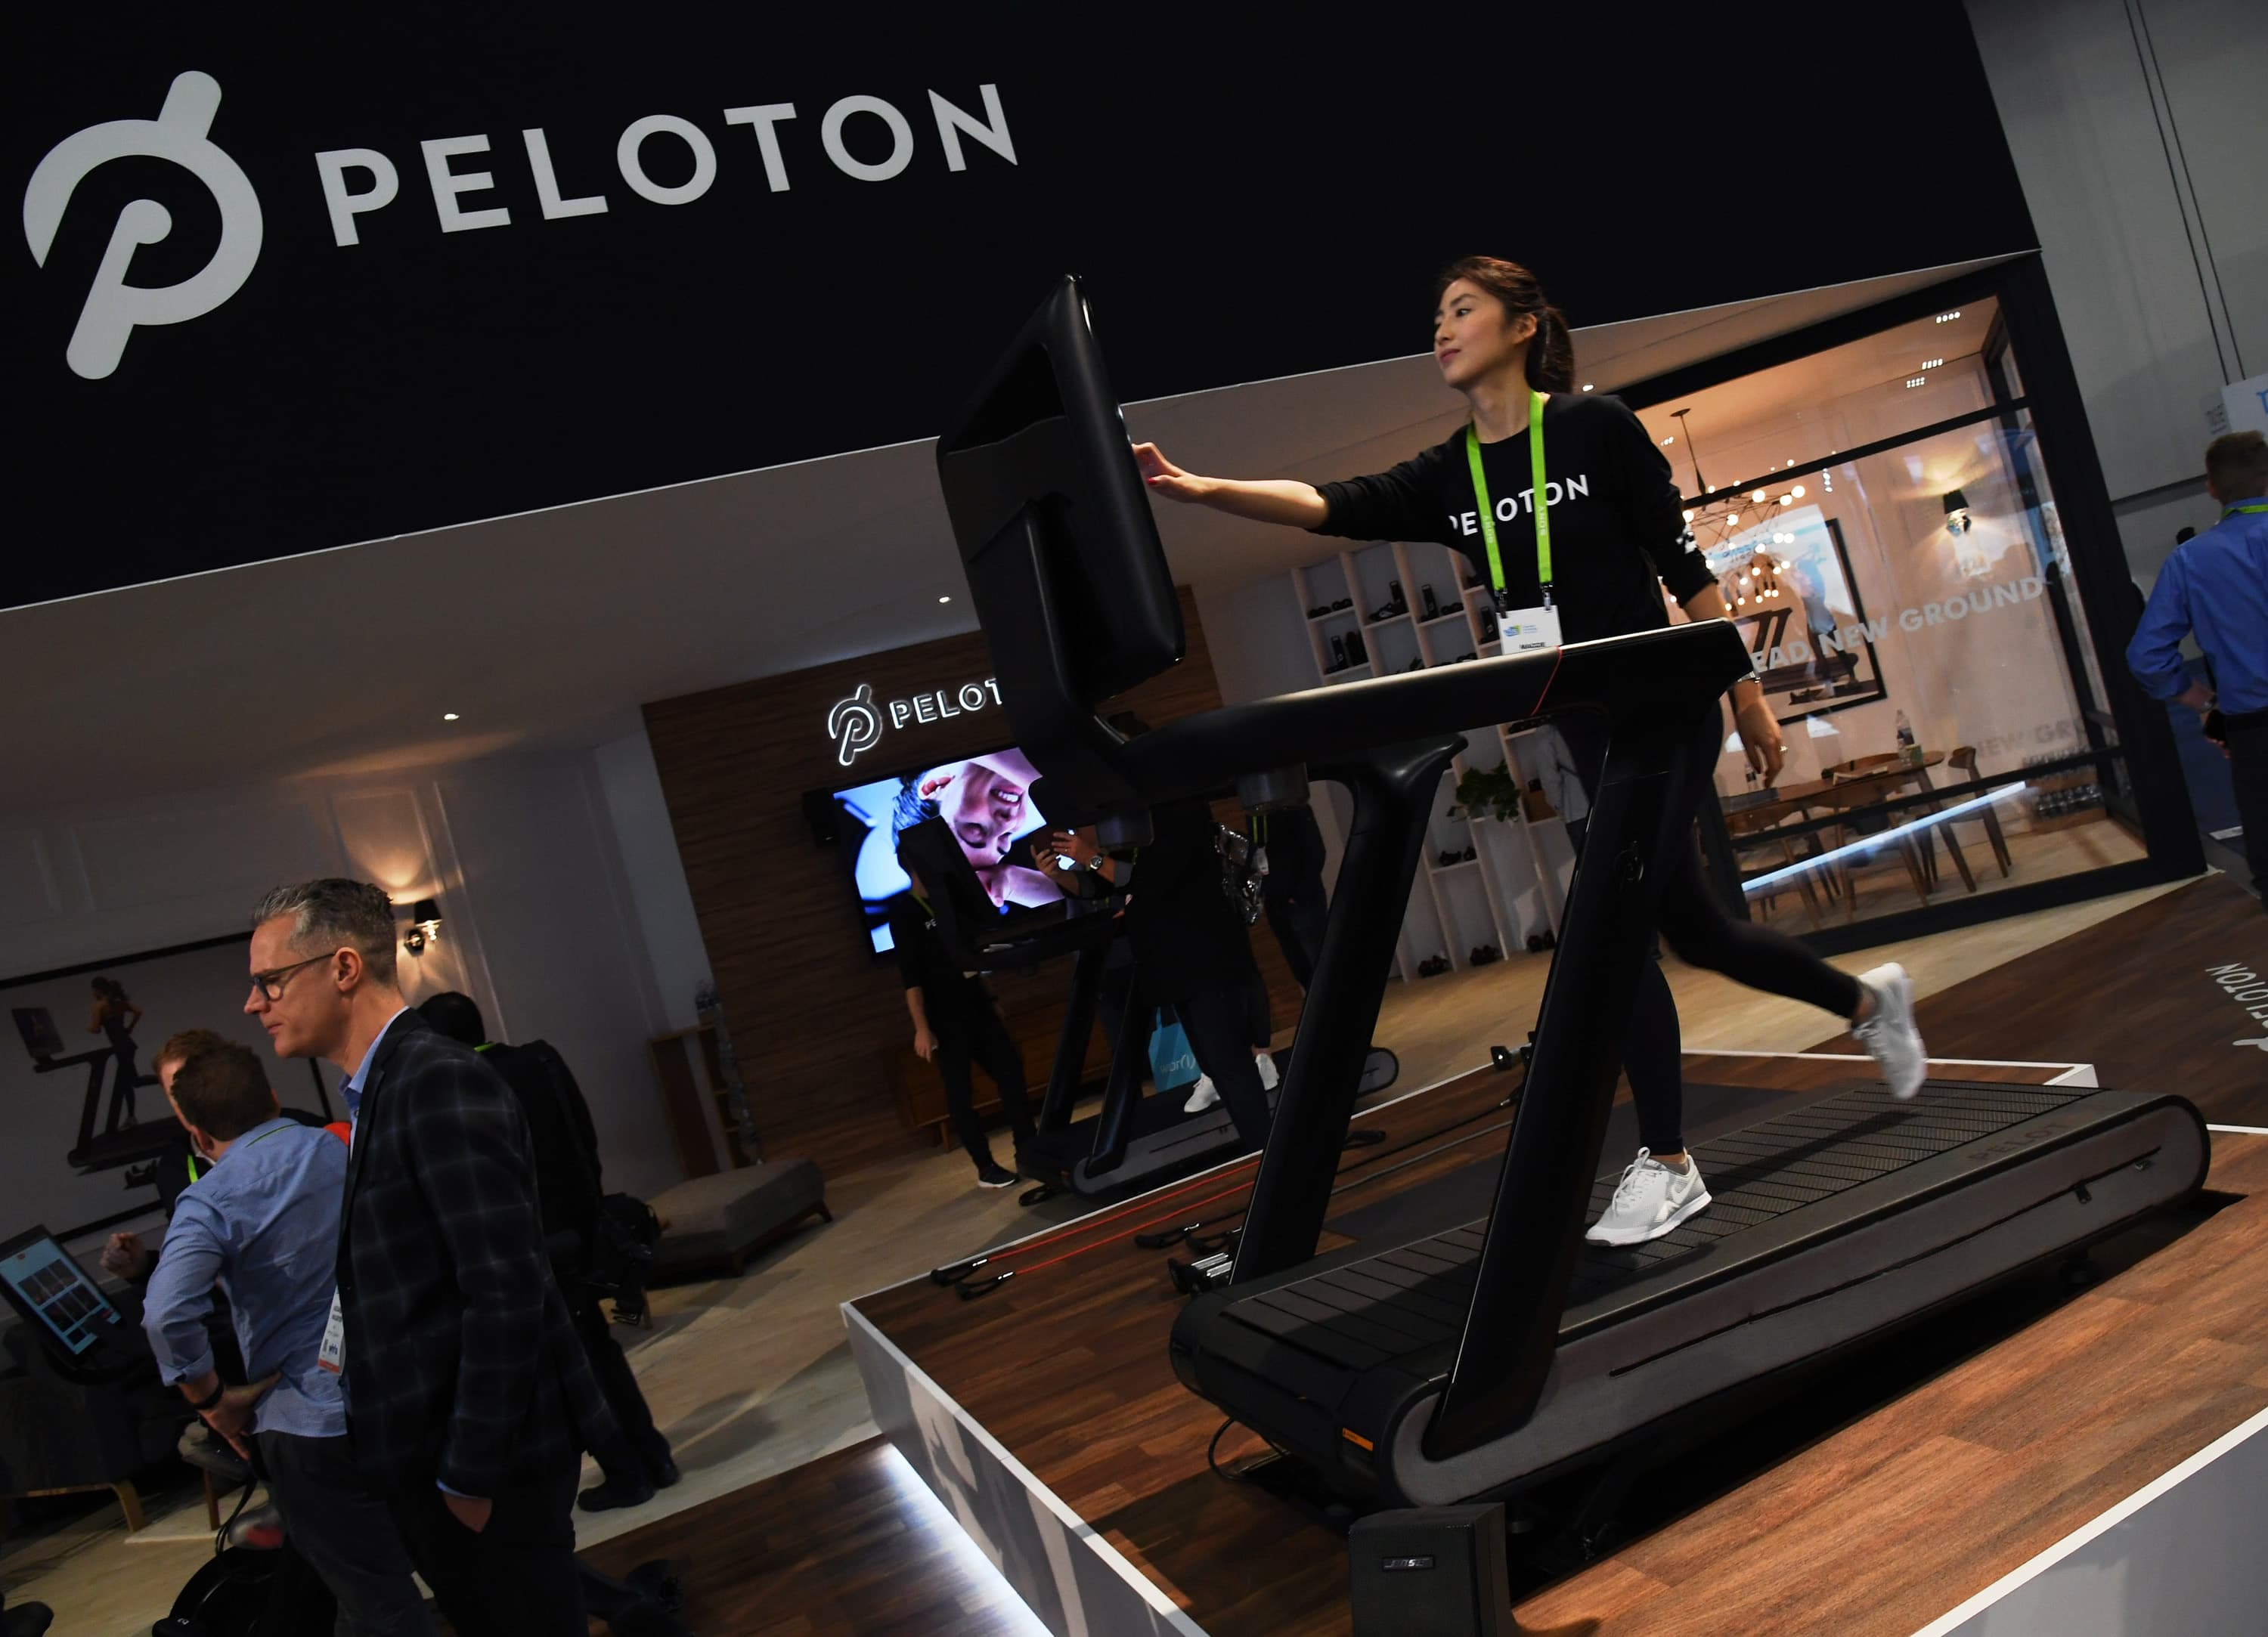 Peloton’s clash with the agency over Tread + safety could tarnish the brand